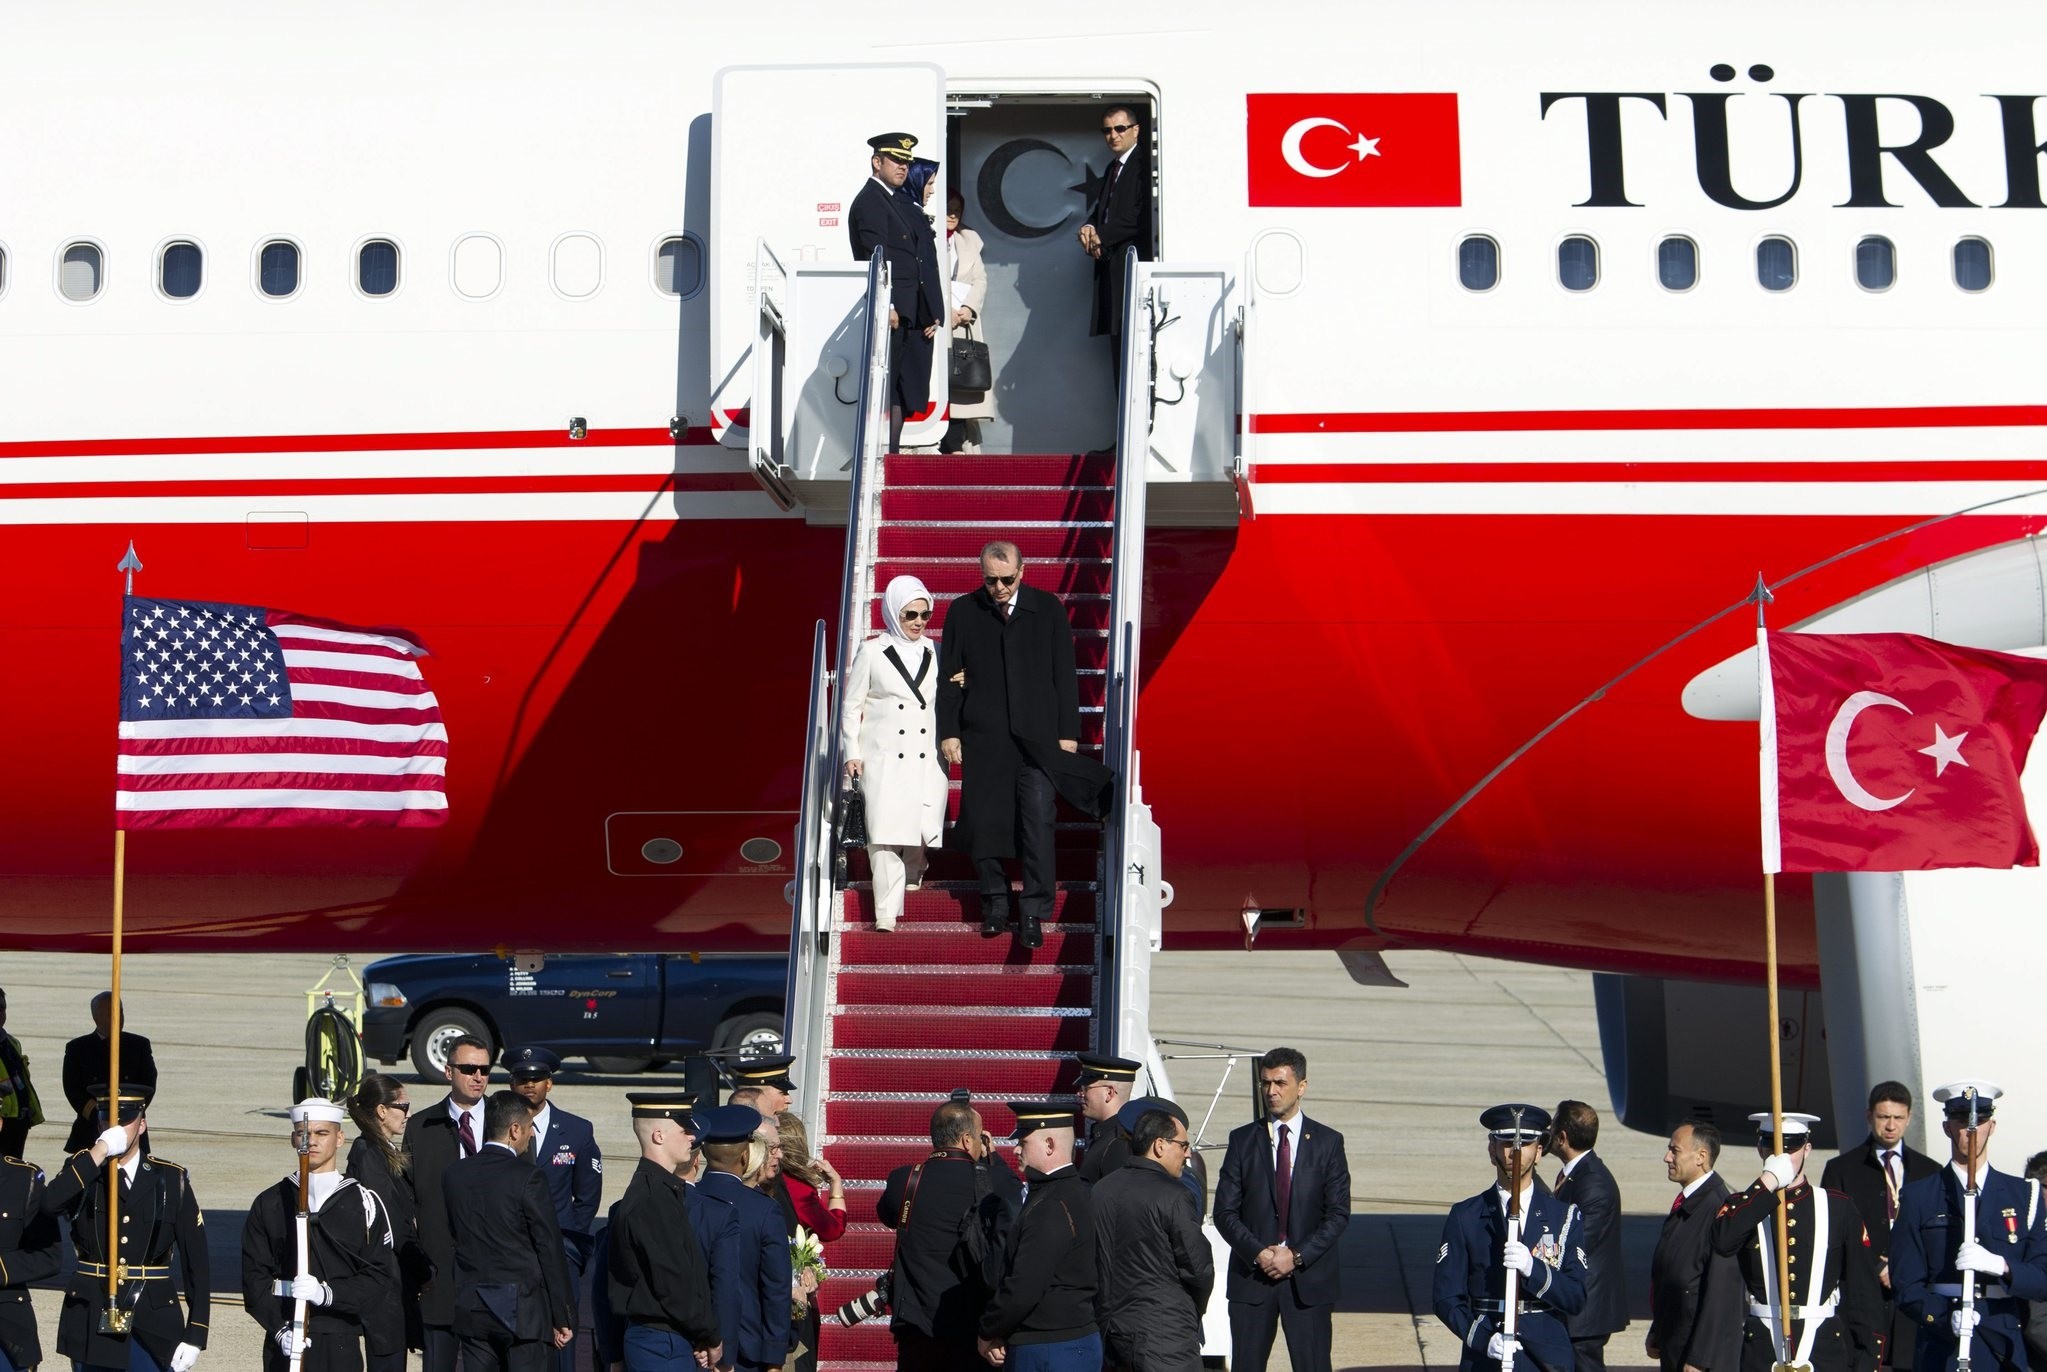  President Recep Tayyip Erdou011fan accompanied by his wife Emine walk down the stairs upon his arrival at Andrews Air Force Base, Md., Tuesday, March 29, 2016. (AP Photo)